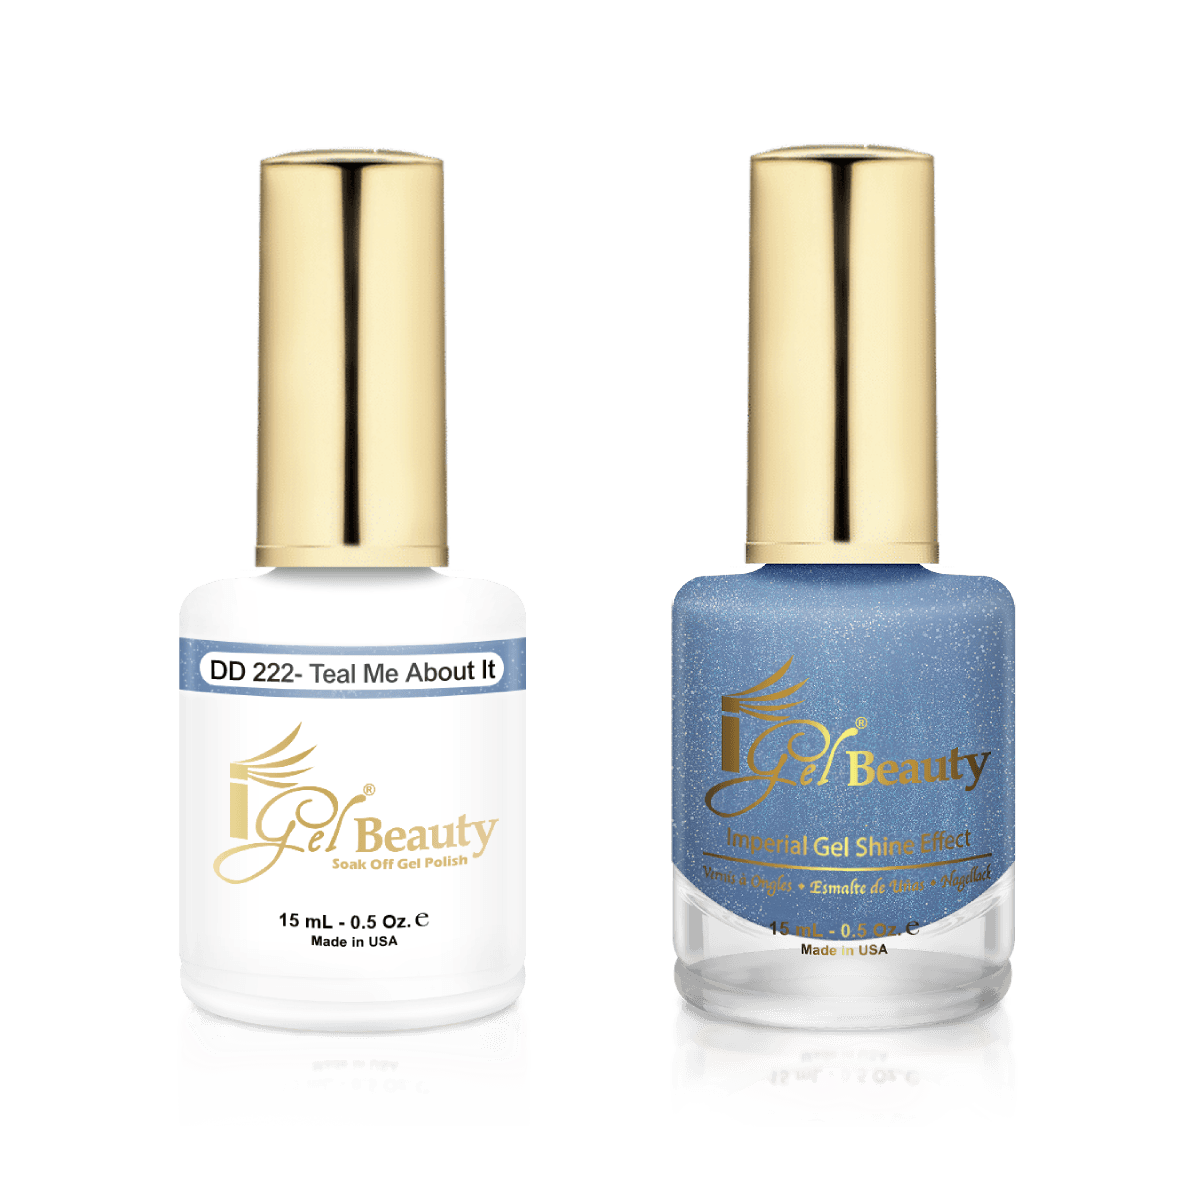 IGel Duo Gel Polish + Matching Nail Lacquer DD 222 TEAL ME ABOUT IT